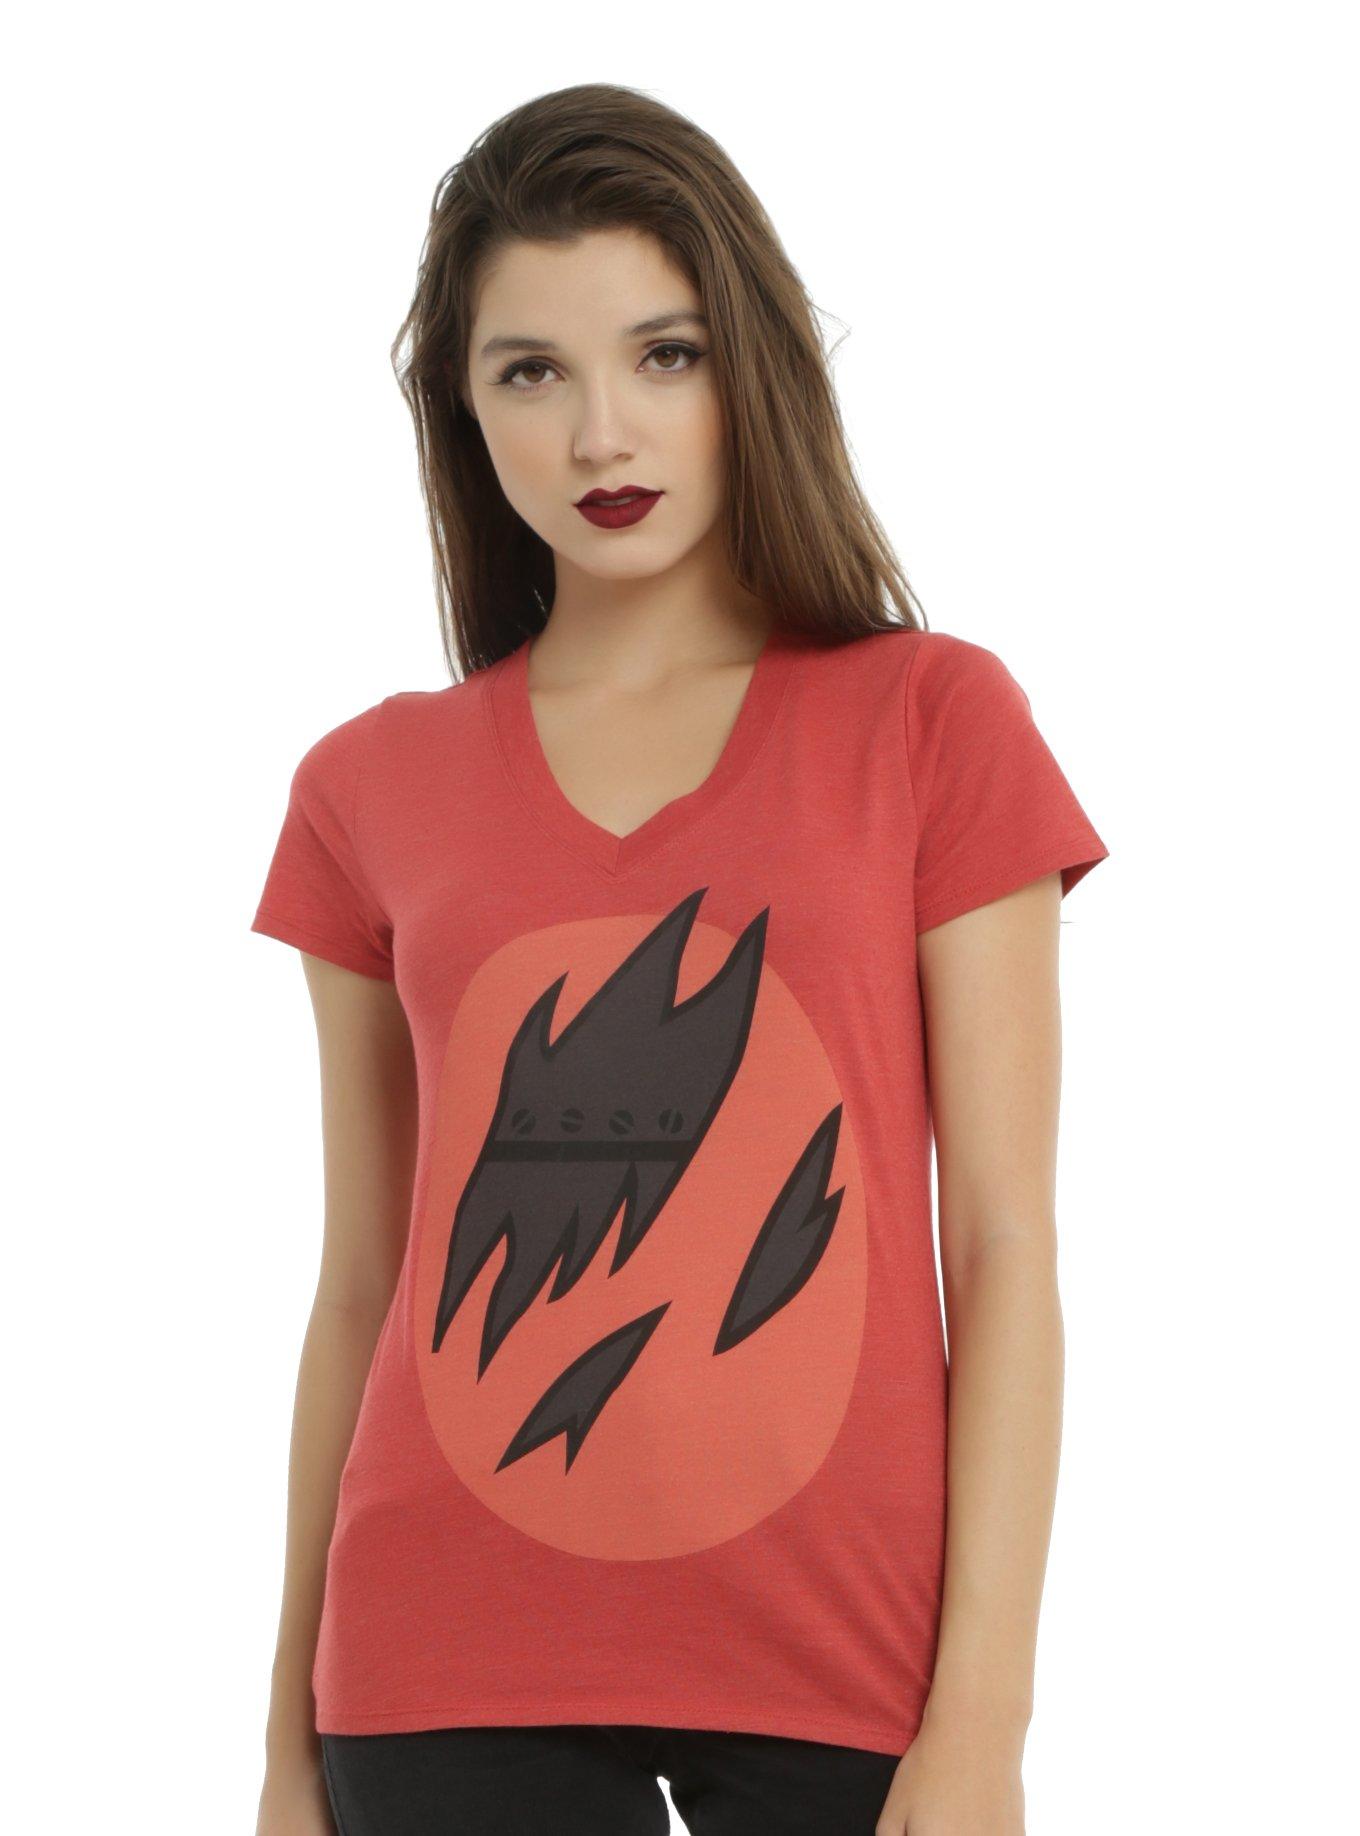 Five Nights At Freddy's Foxy Cosplay Girls T-Shirt | Hot Topic